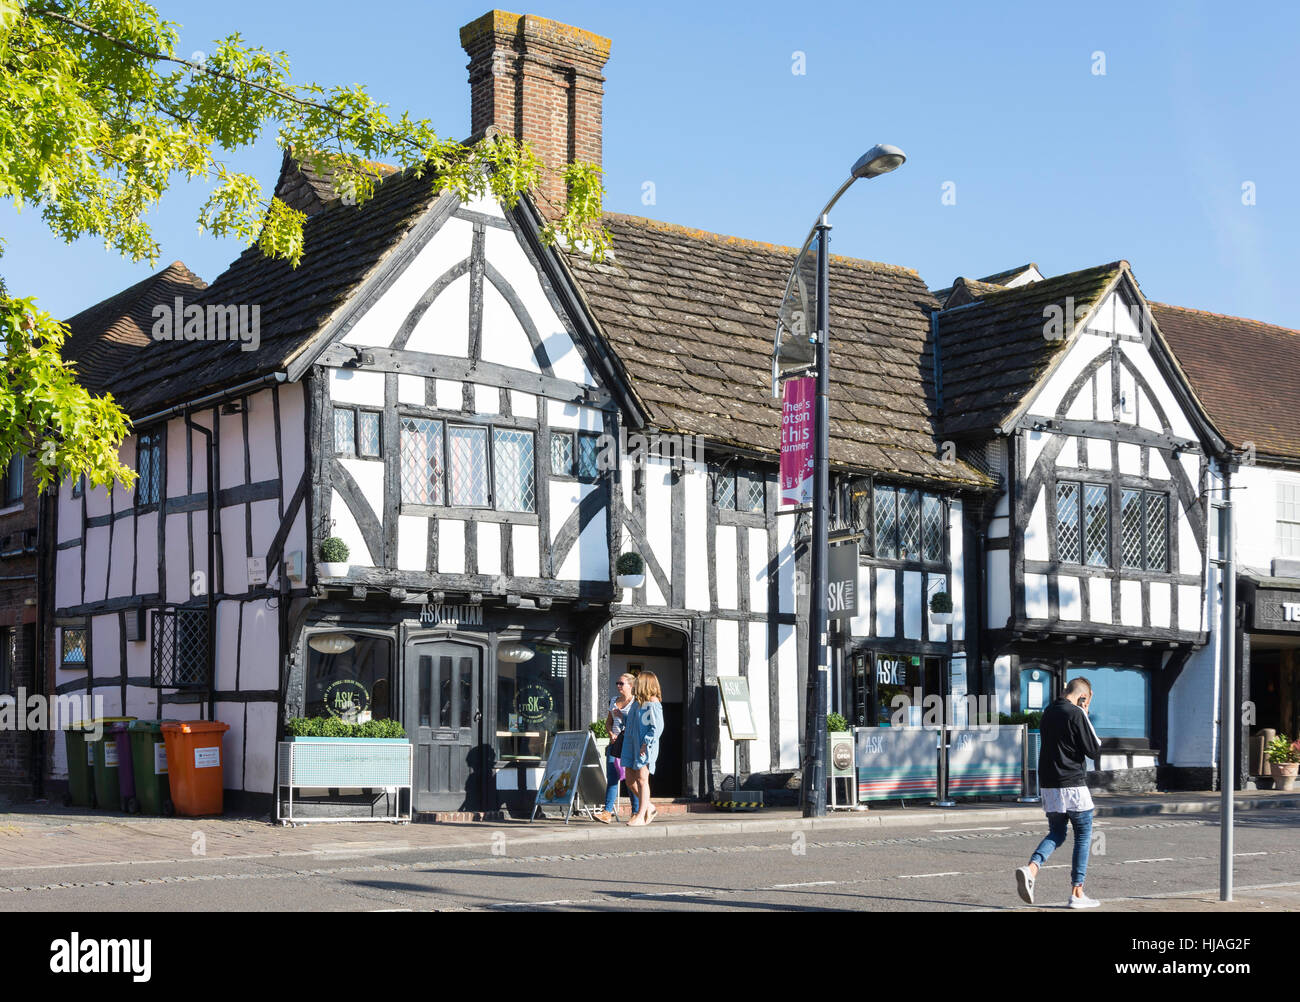 Ask Italian restaurant in 15th century timber-framed building, High Street, Crawley, West Sussex, England, United Kingdom Stock Photo